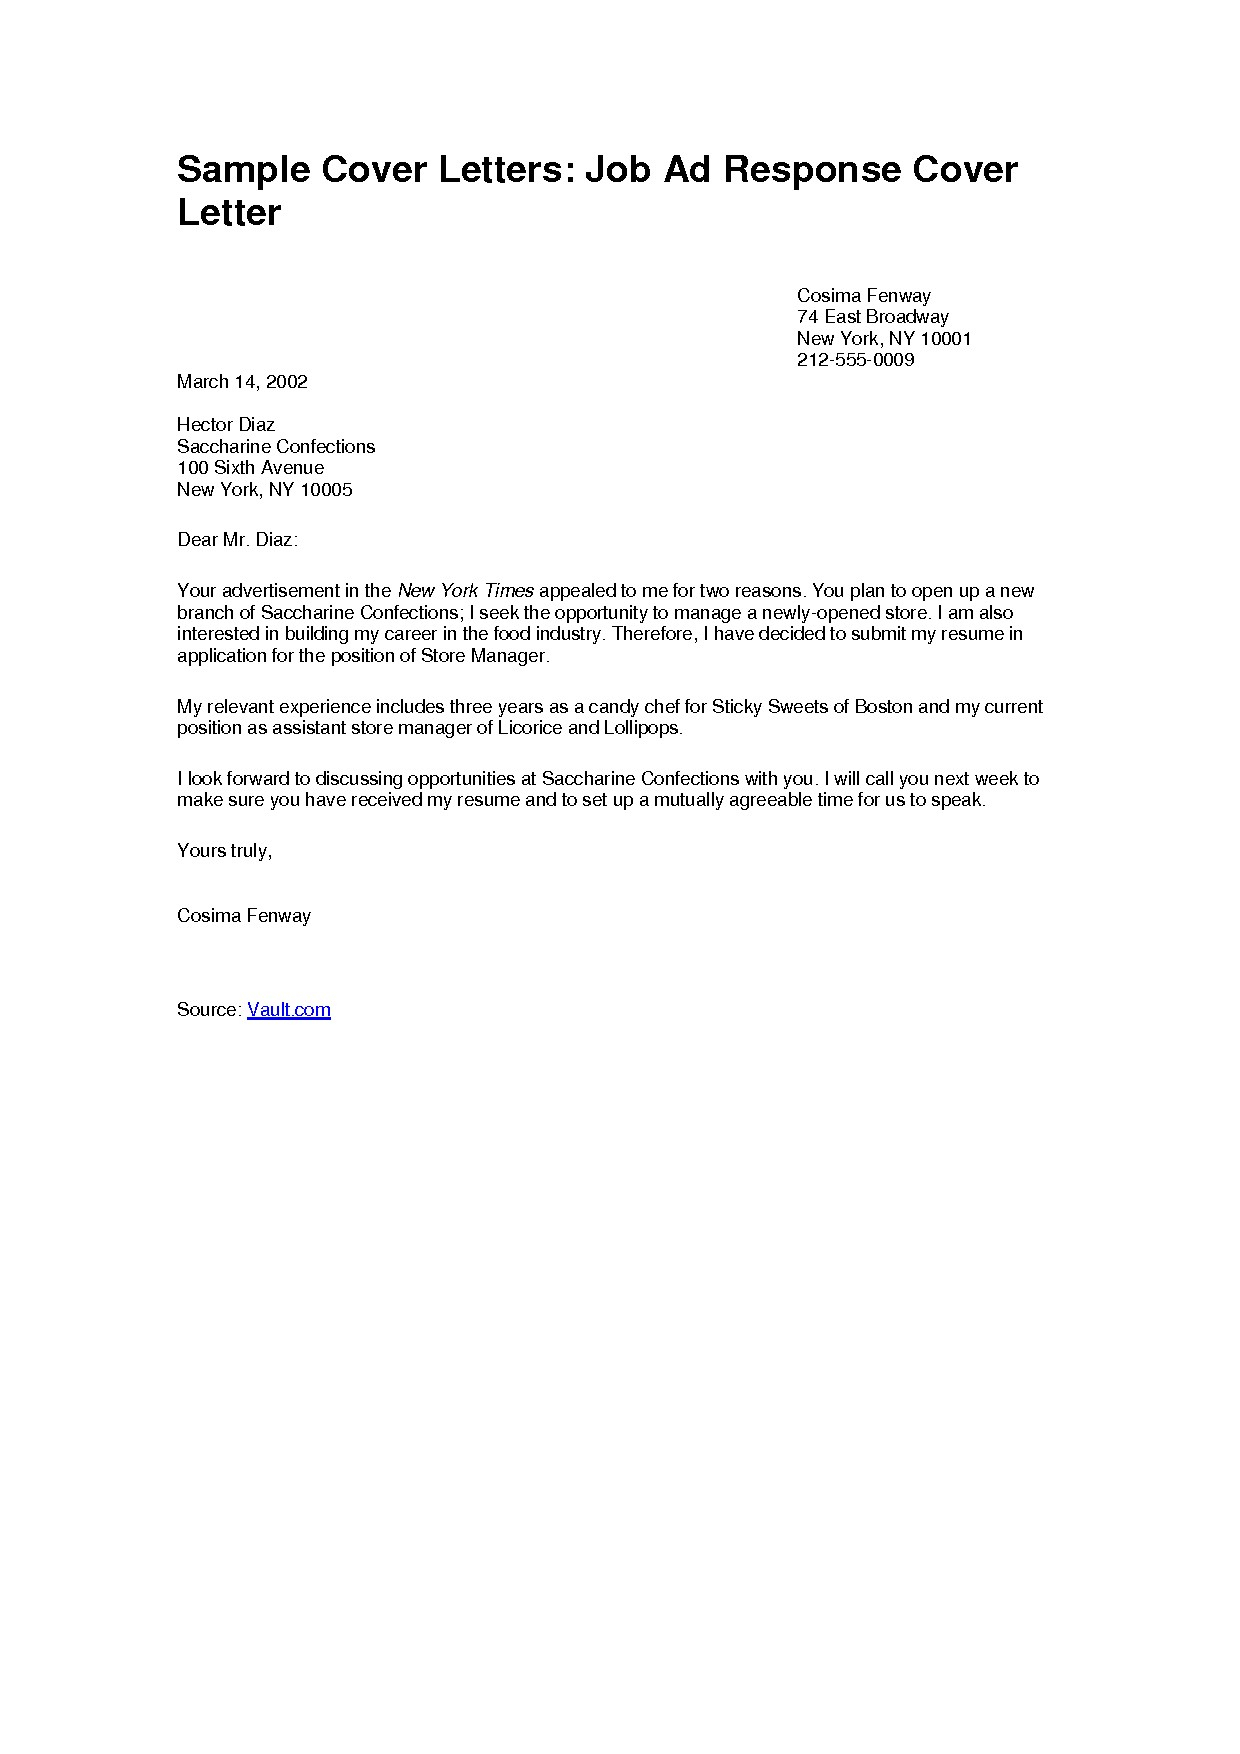 Job Application Letter Template - Samples Of Job Cover Letters Acurnamedia